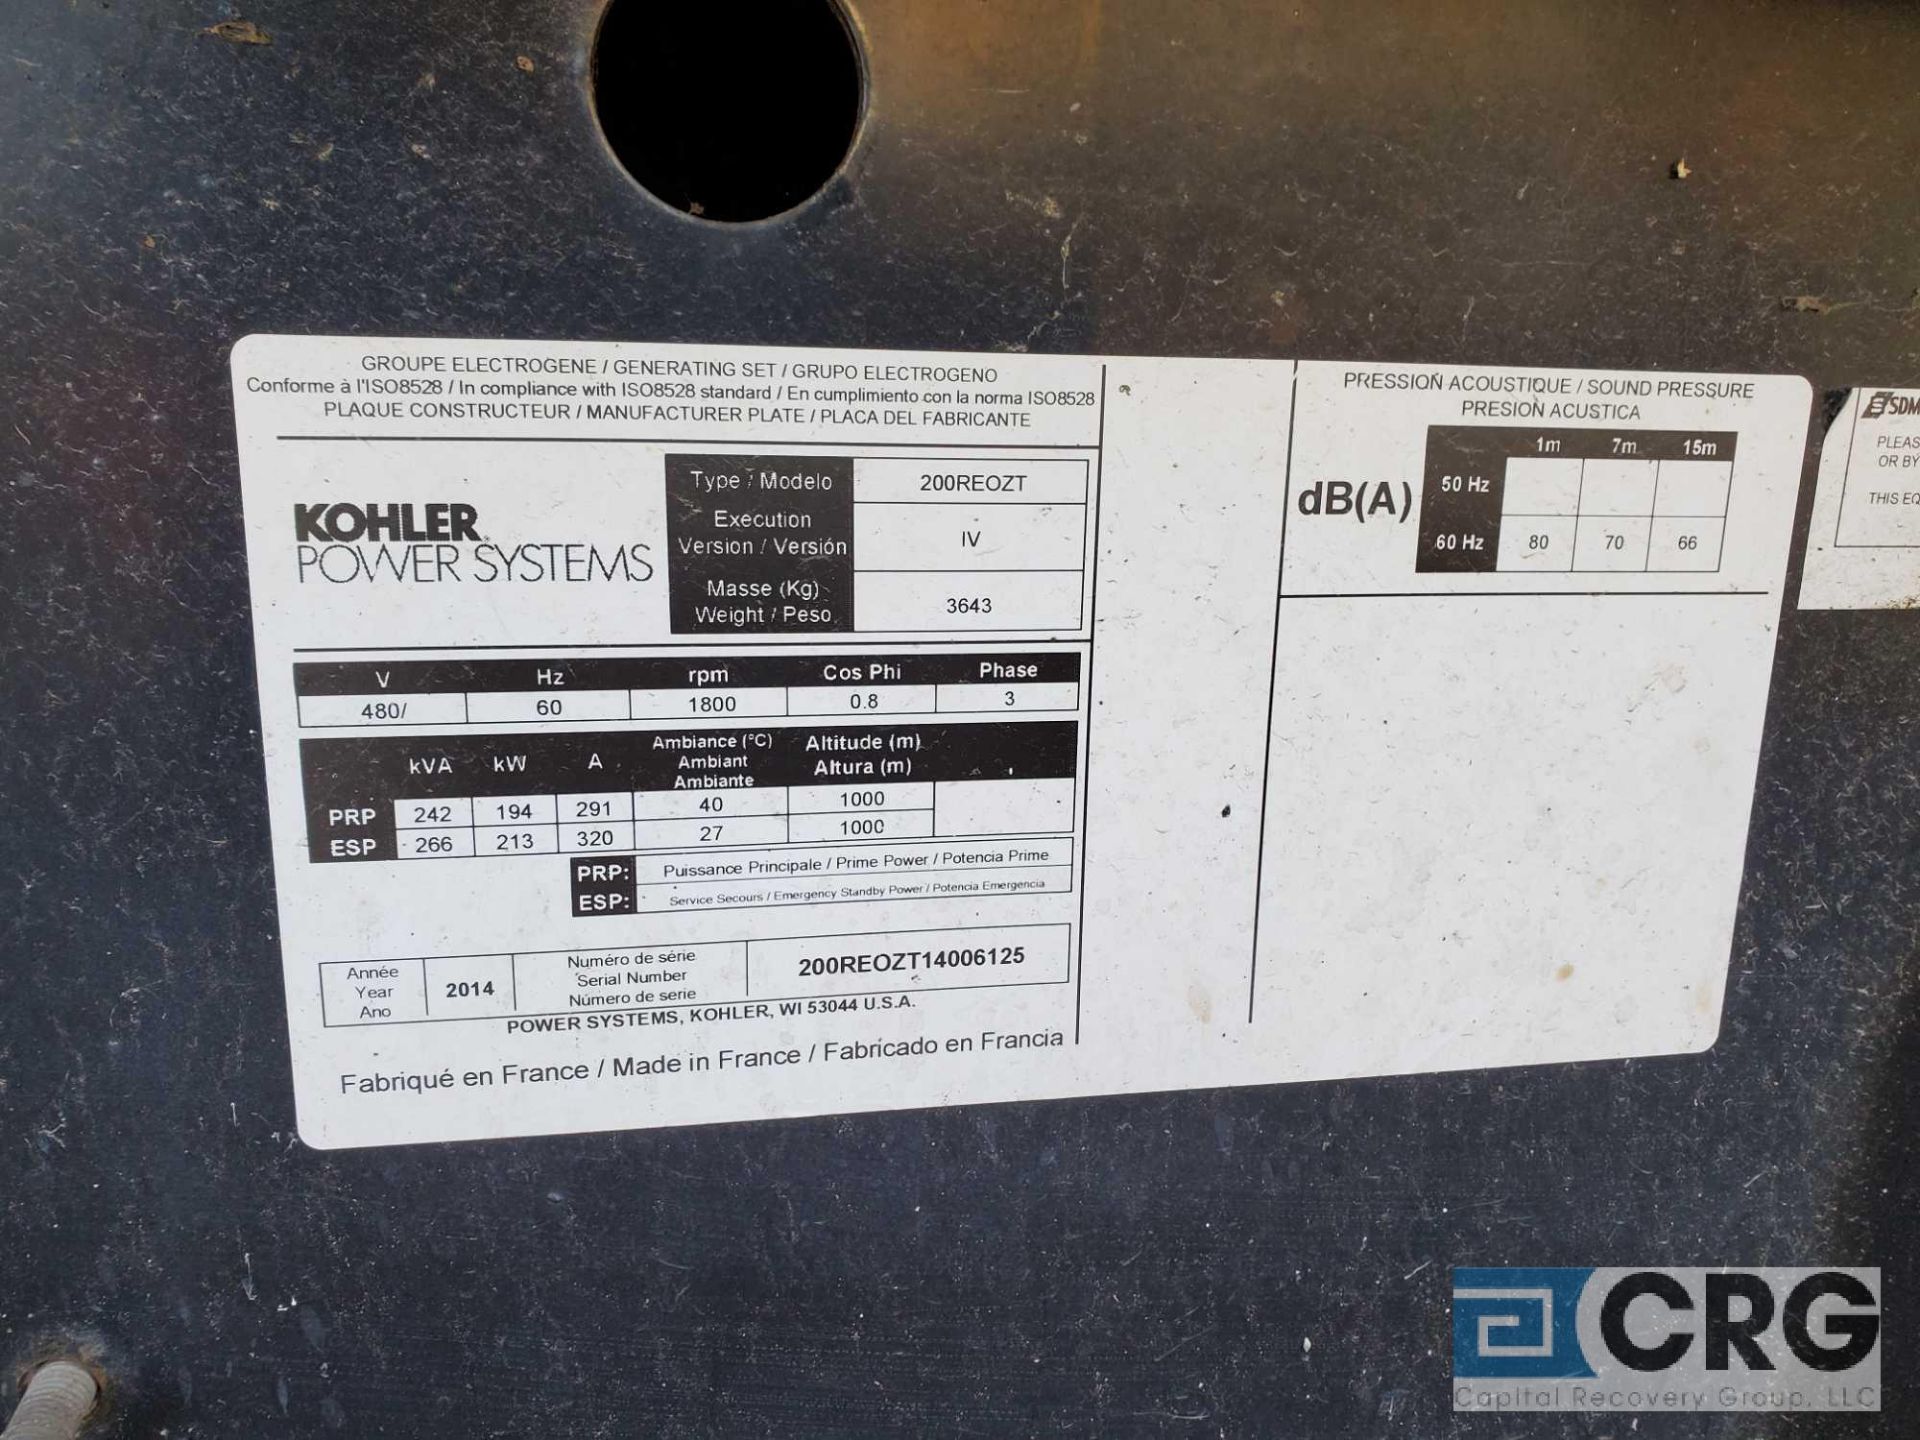 Kohler Power Systems 200 Generator, needs new motor, [located at 2527 Market St, Aston, PA 19014] - Image 4 of 6